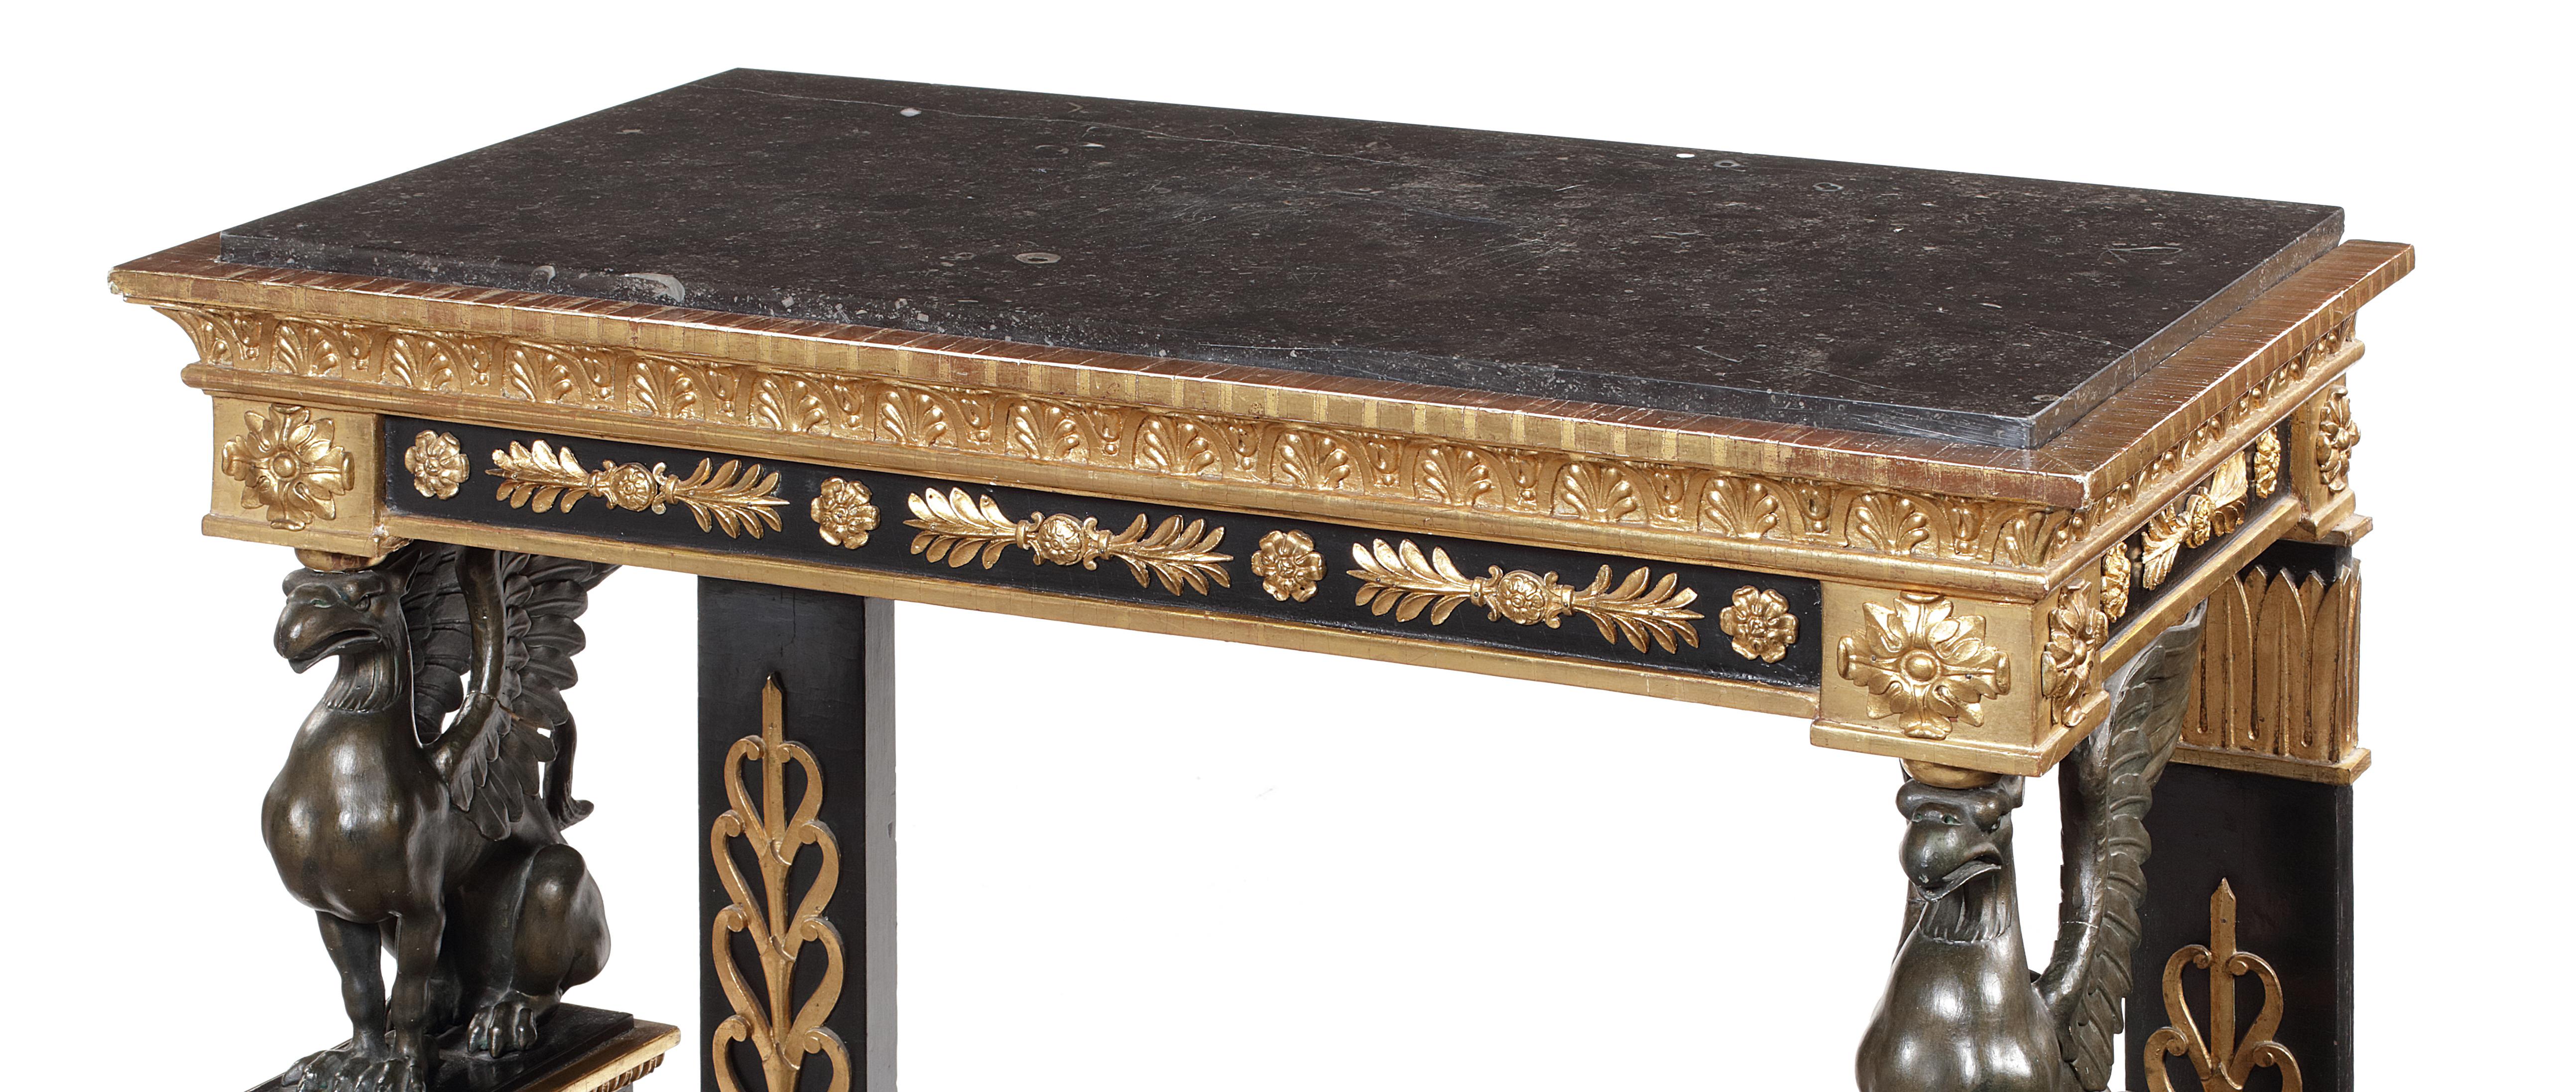 19th century and later, ebonised, gilt wood and composition console table
in the Empire style, after Percier & Fontaine
The rectangular inset black fossilised marble top above anthemion and thrysus applied frieze, on griffin supports applied with